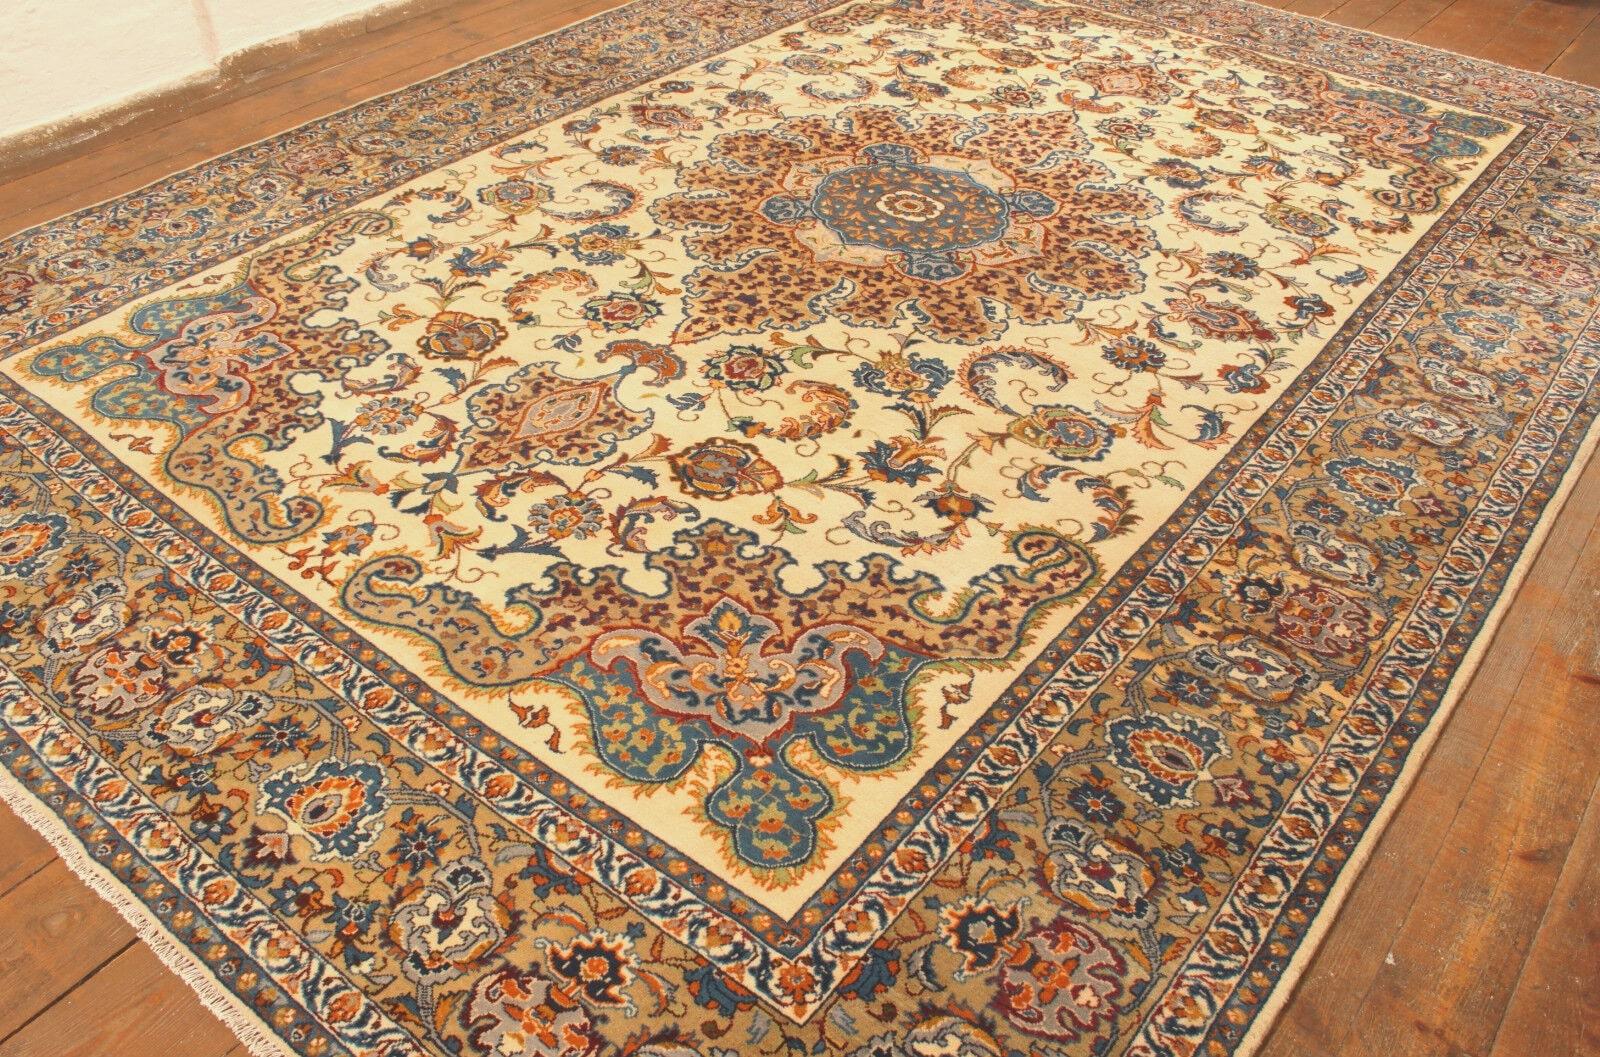 Handmade Vintage Persian Style Isfahan Rug (303cm x 420cm / 9.9’ x 13.7’)

Behold the splendor of our Handmade Vintage Persian Style Isfahan Rug from the 1990s. This woolen masterpiece, spanning 303cm x 420cm (9.9’ x 13.7’), is a testament to the